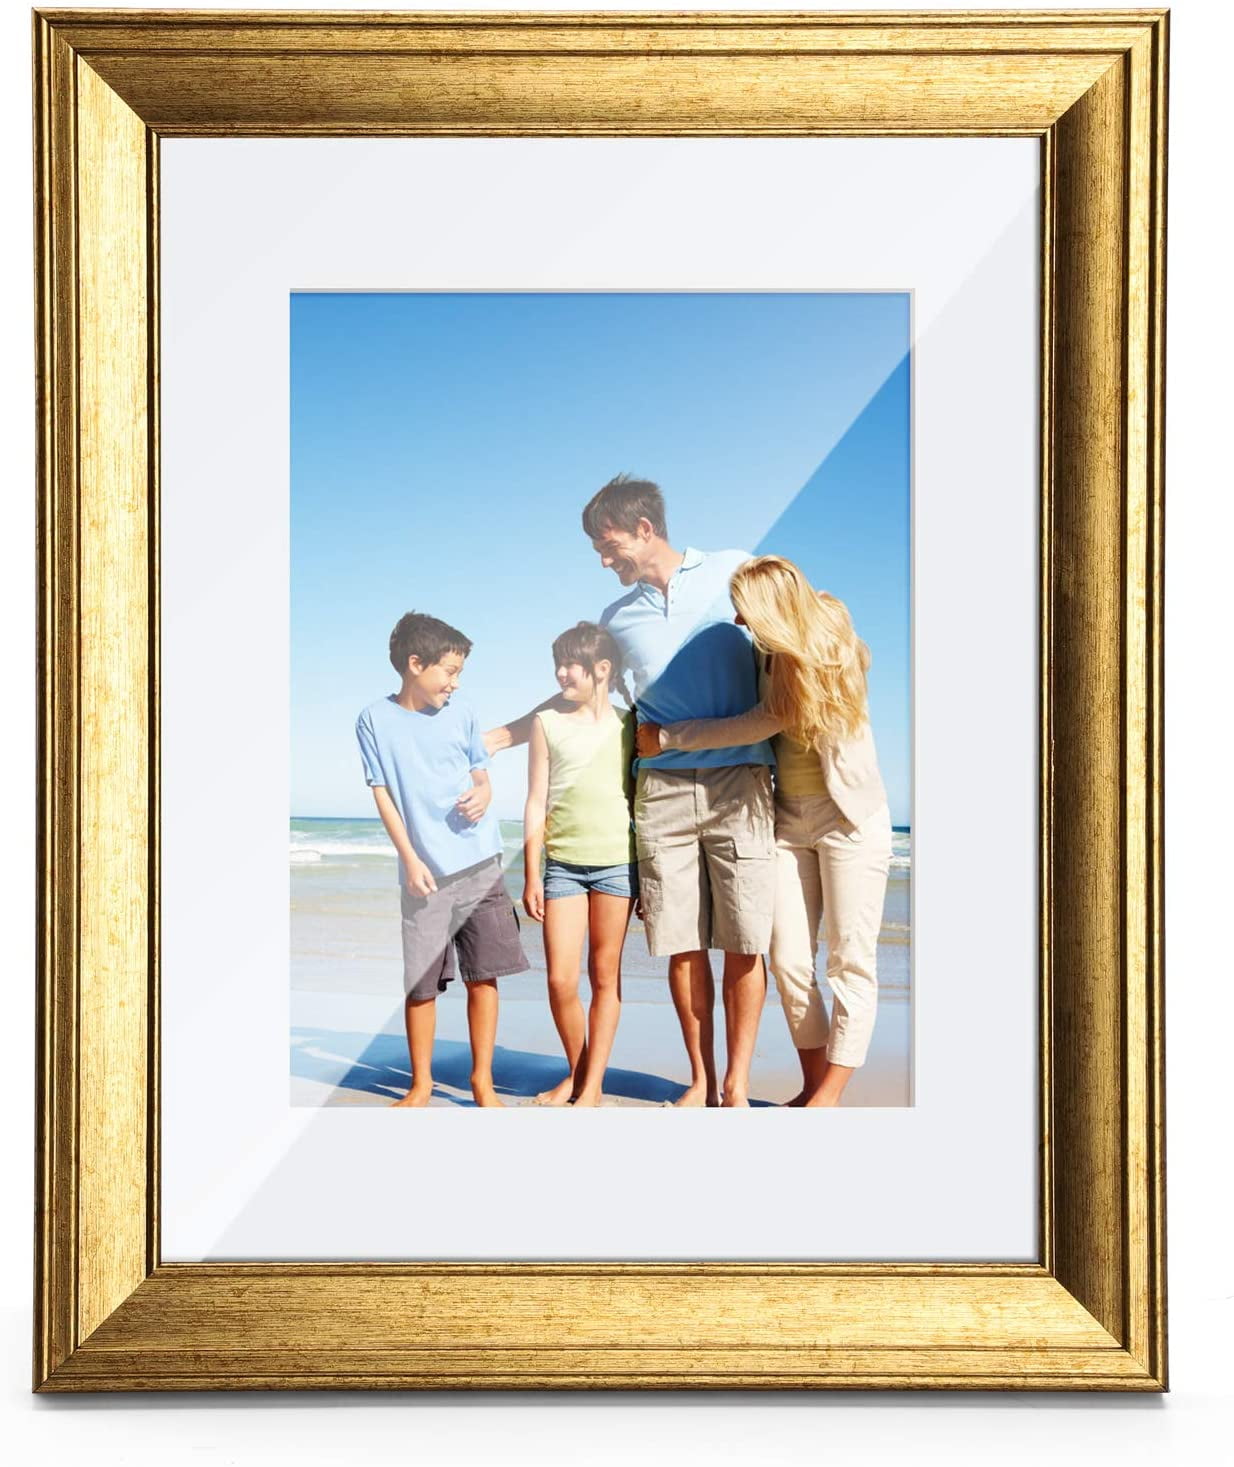 Table Top Display and Wall Mounting MDF Wood Ideal Gift to Family and Friends TWING 4x6 Picture Frame Gold Displays 3.5x5 Photo Frame with Mat or 4x6 Inch Without Mat Shatter-Resistant Plexiglass